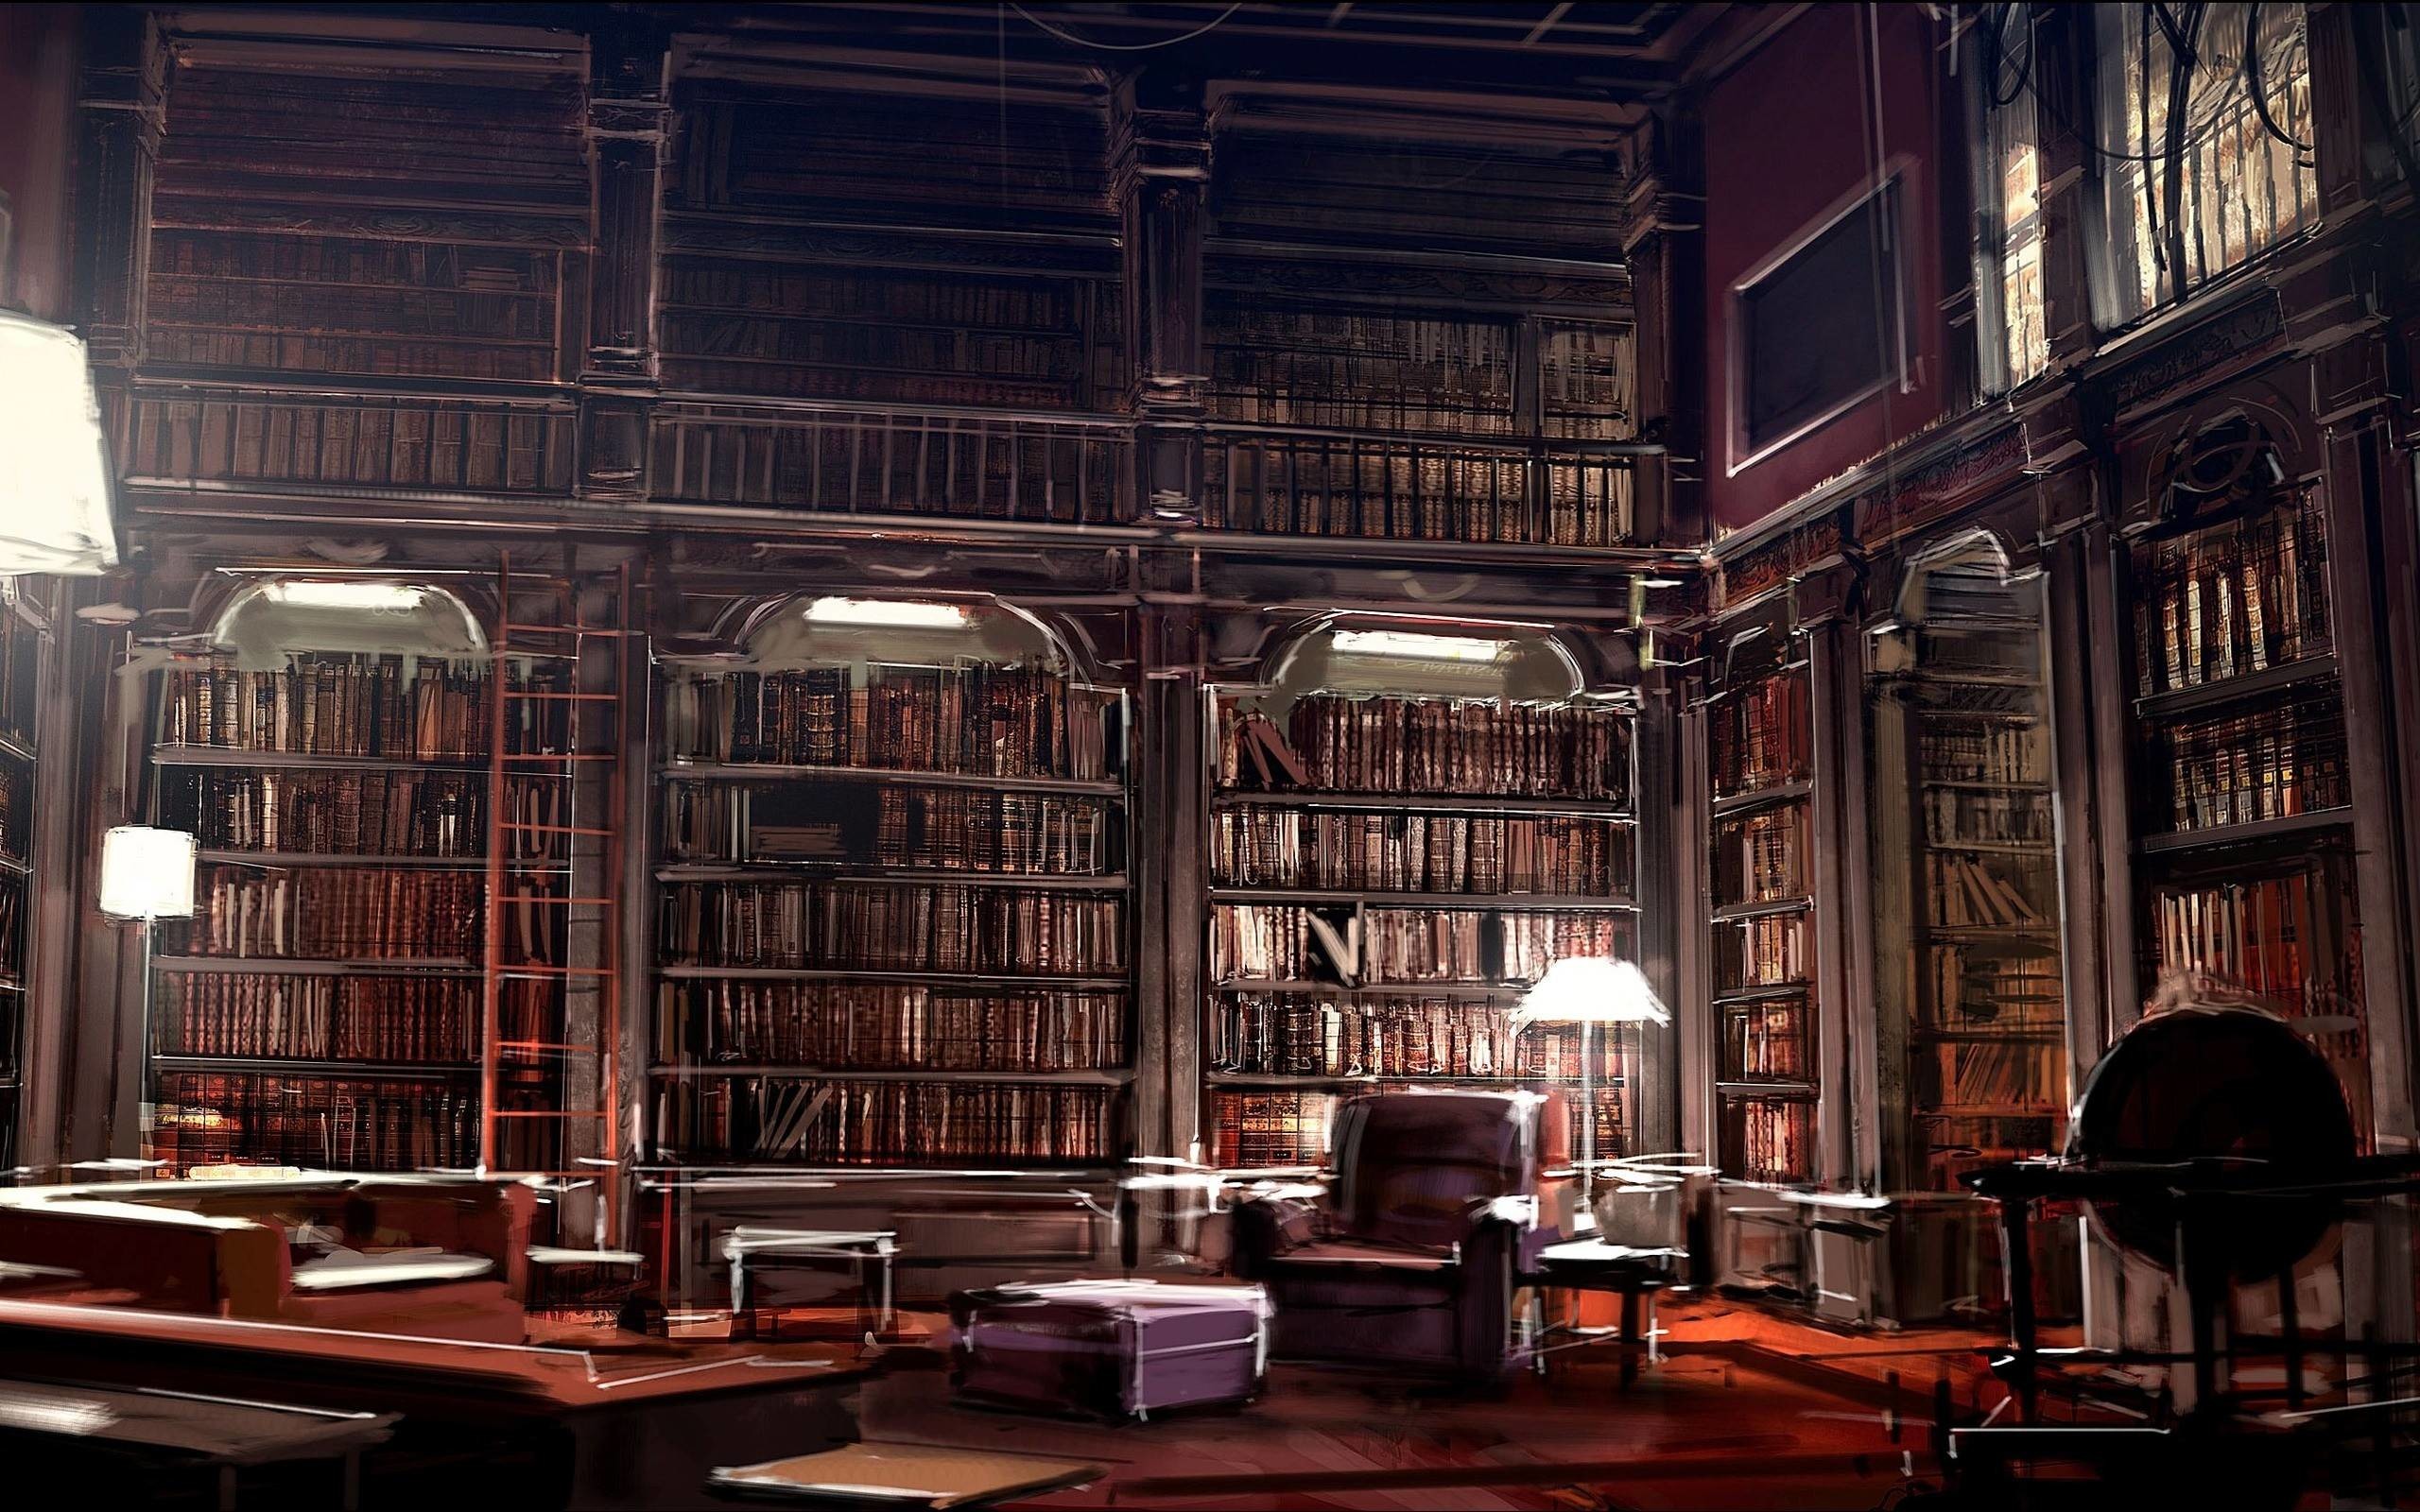 2560x1600 Interior Library Design Hd Wallpaper Library Wallpapers Great